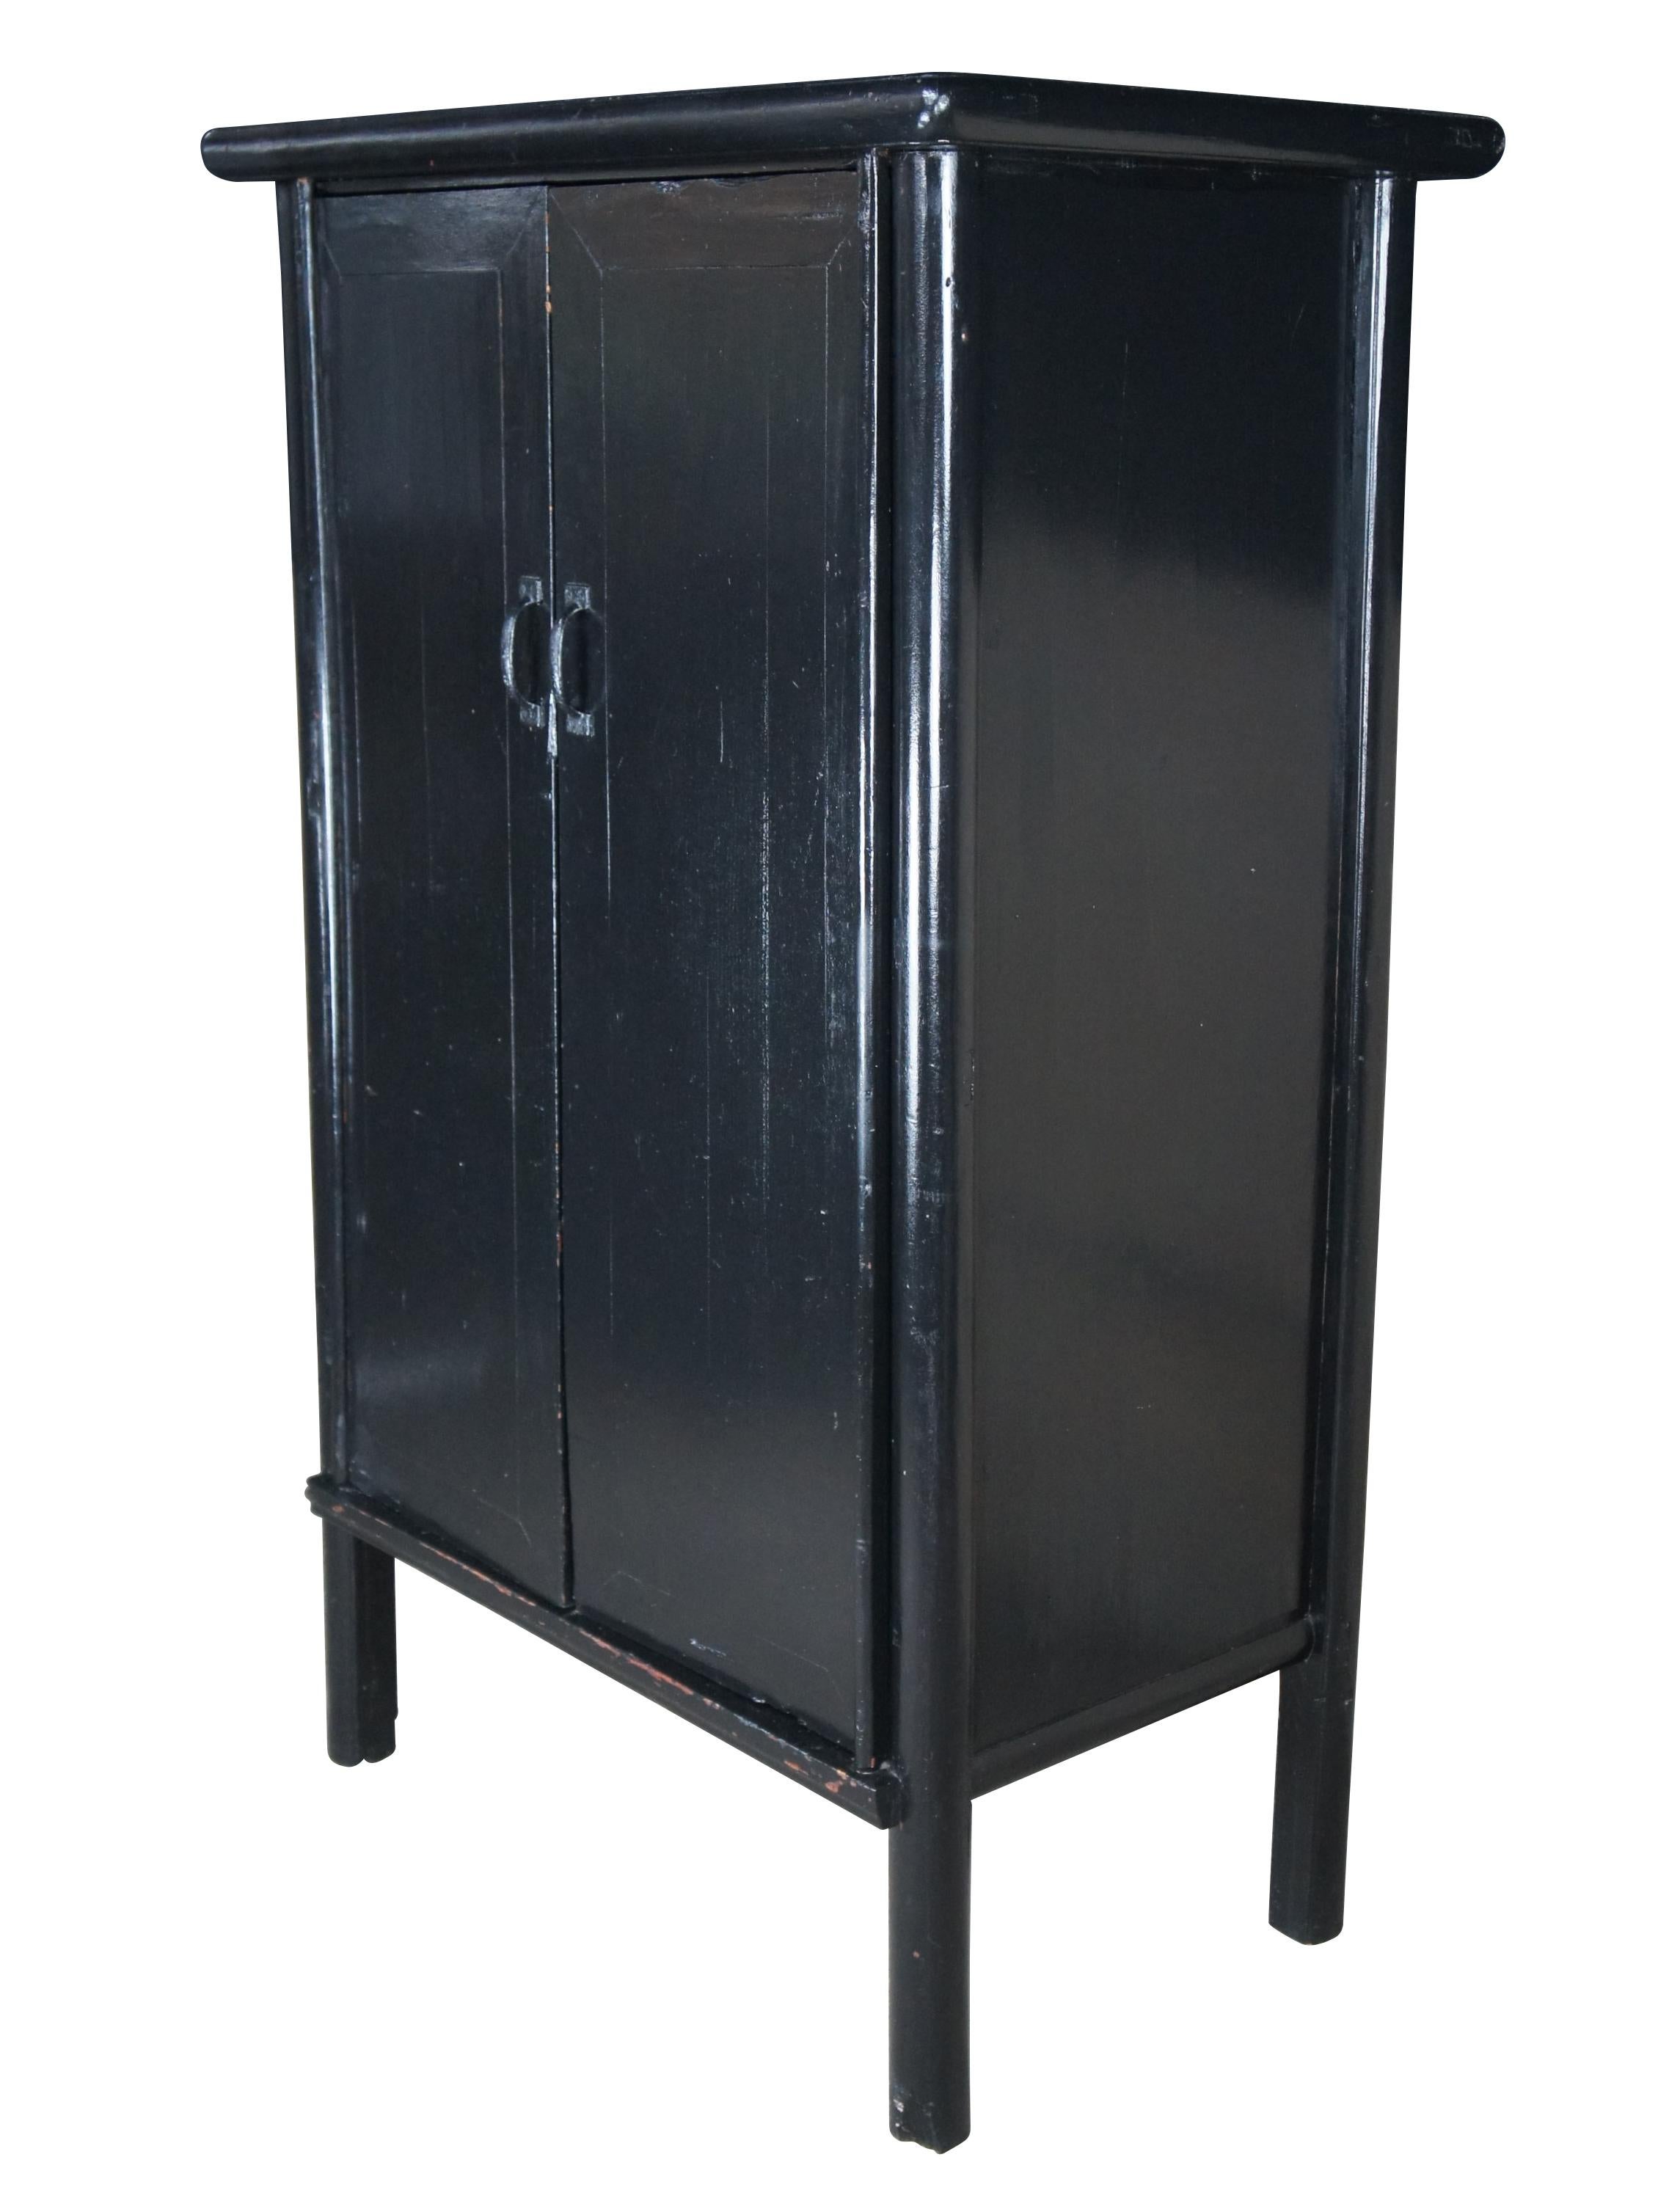 Antique Chinese Qing Dynasty Black Lacquer Elm Armoire Wardrobe Scholars Cabinet In Good Condition For Sale In Dayton, OH